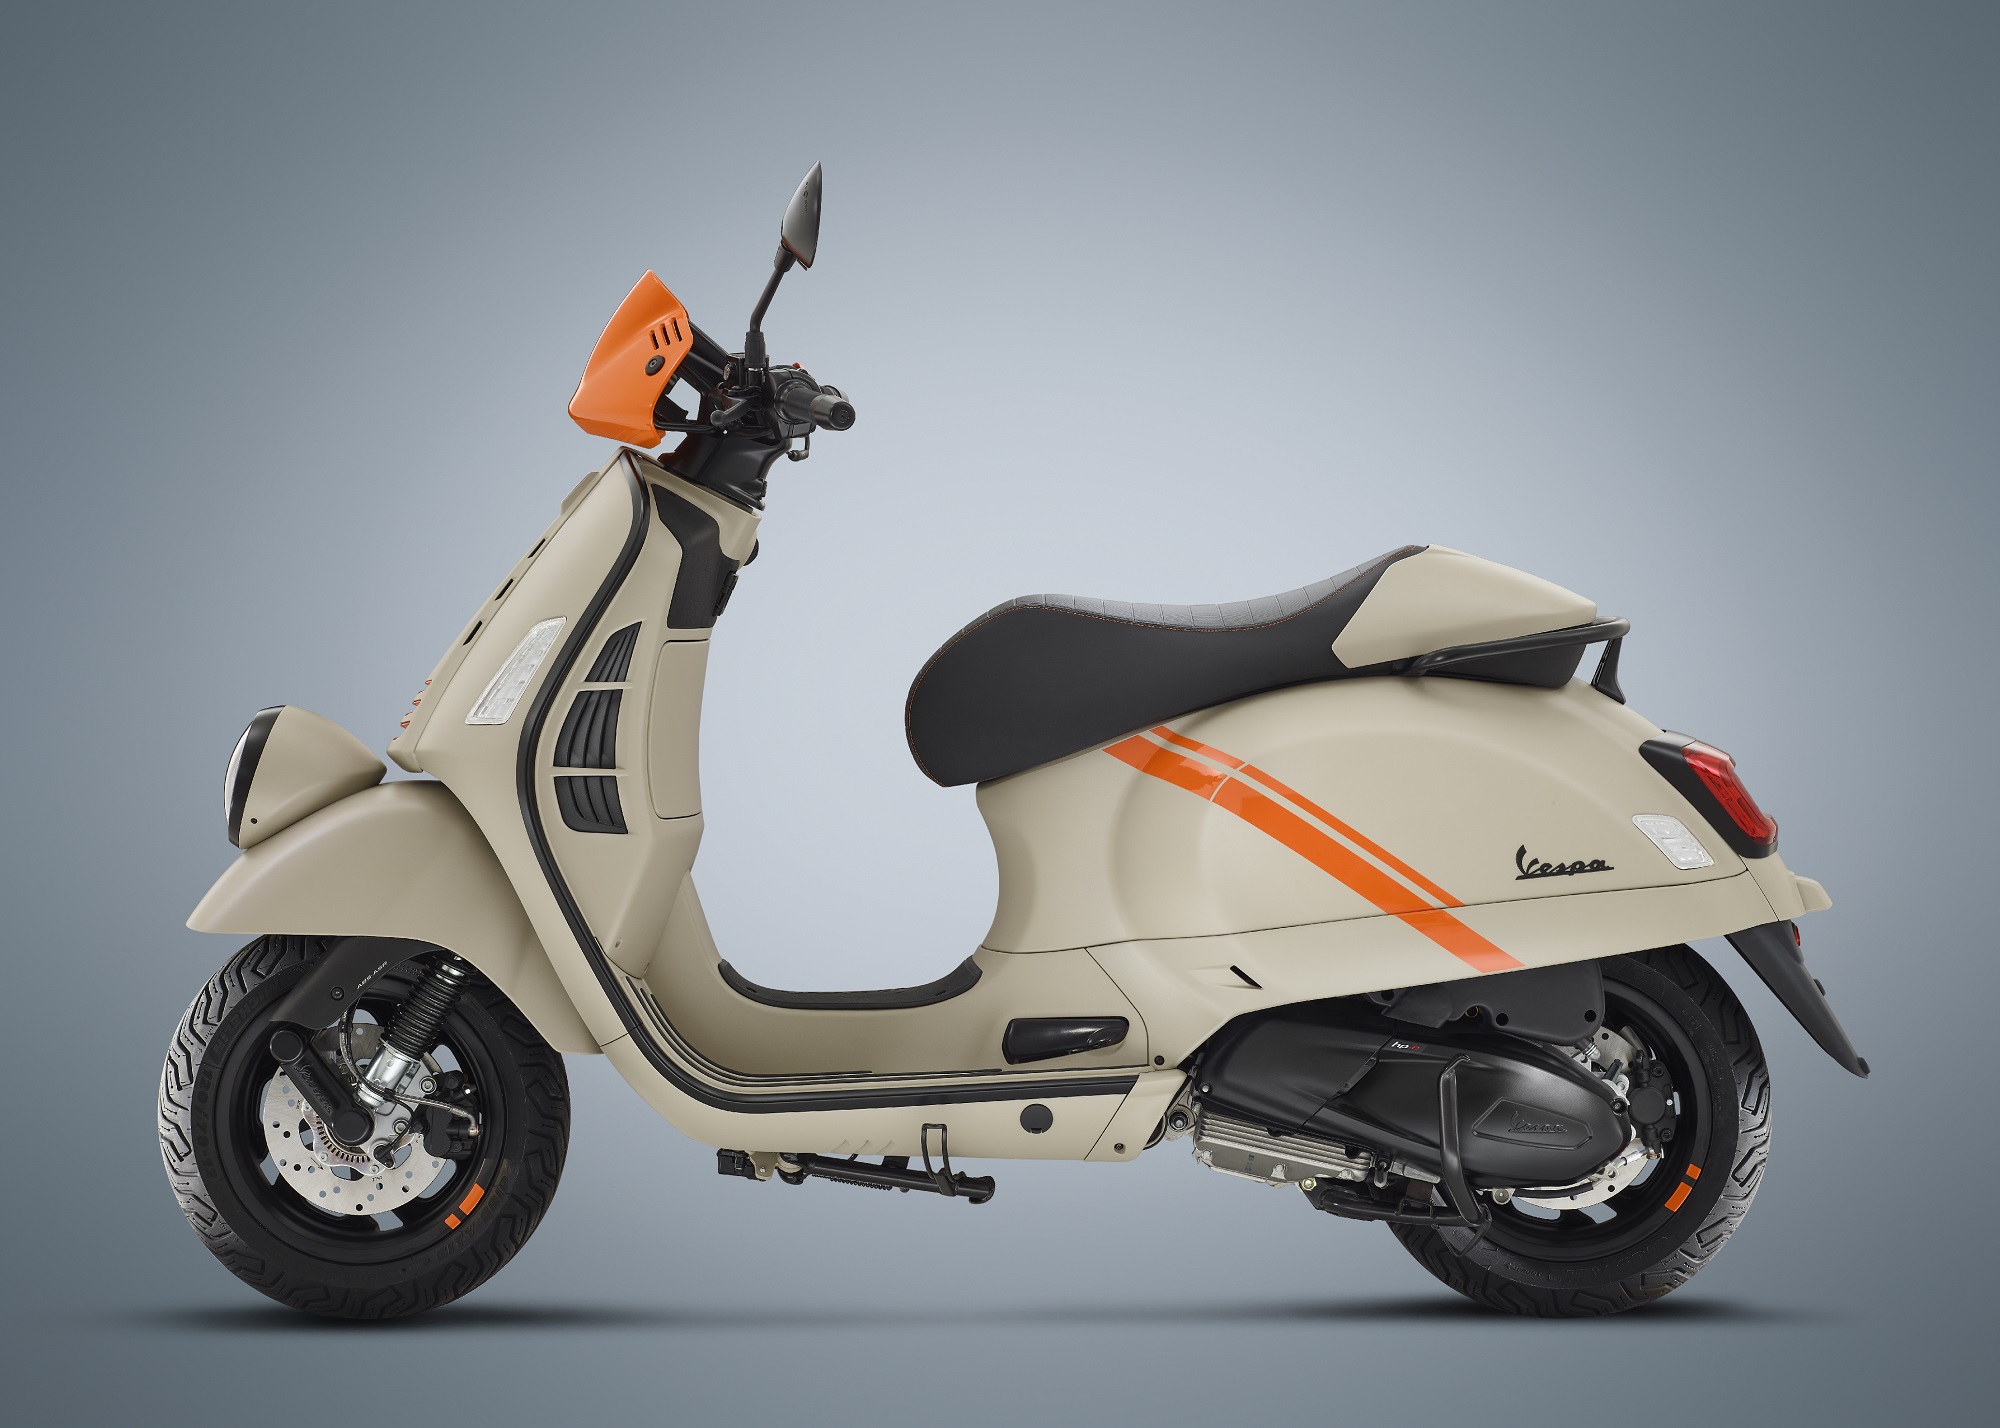 Vespa s Most Powerful Scooter Shown To Put Dolce Vita On Fast forward 